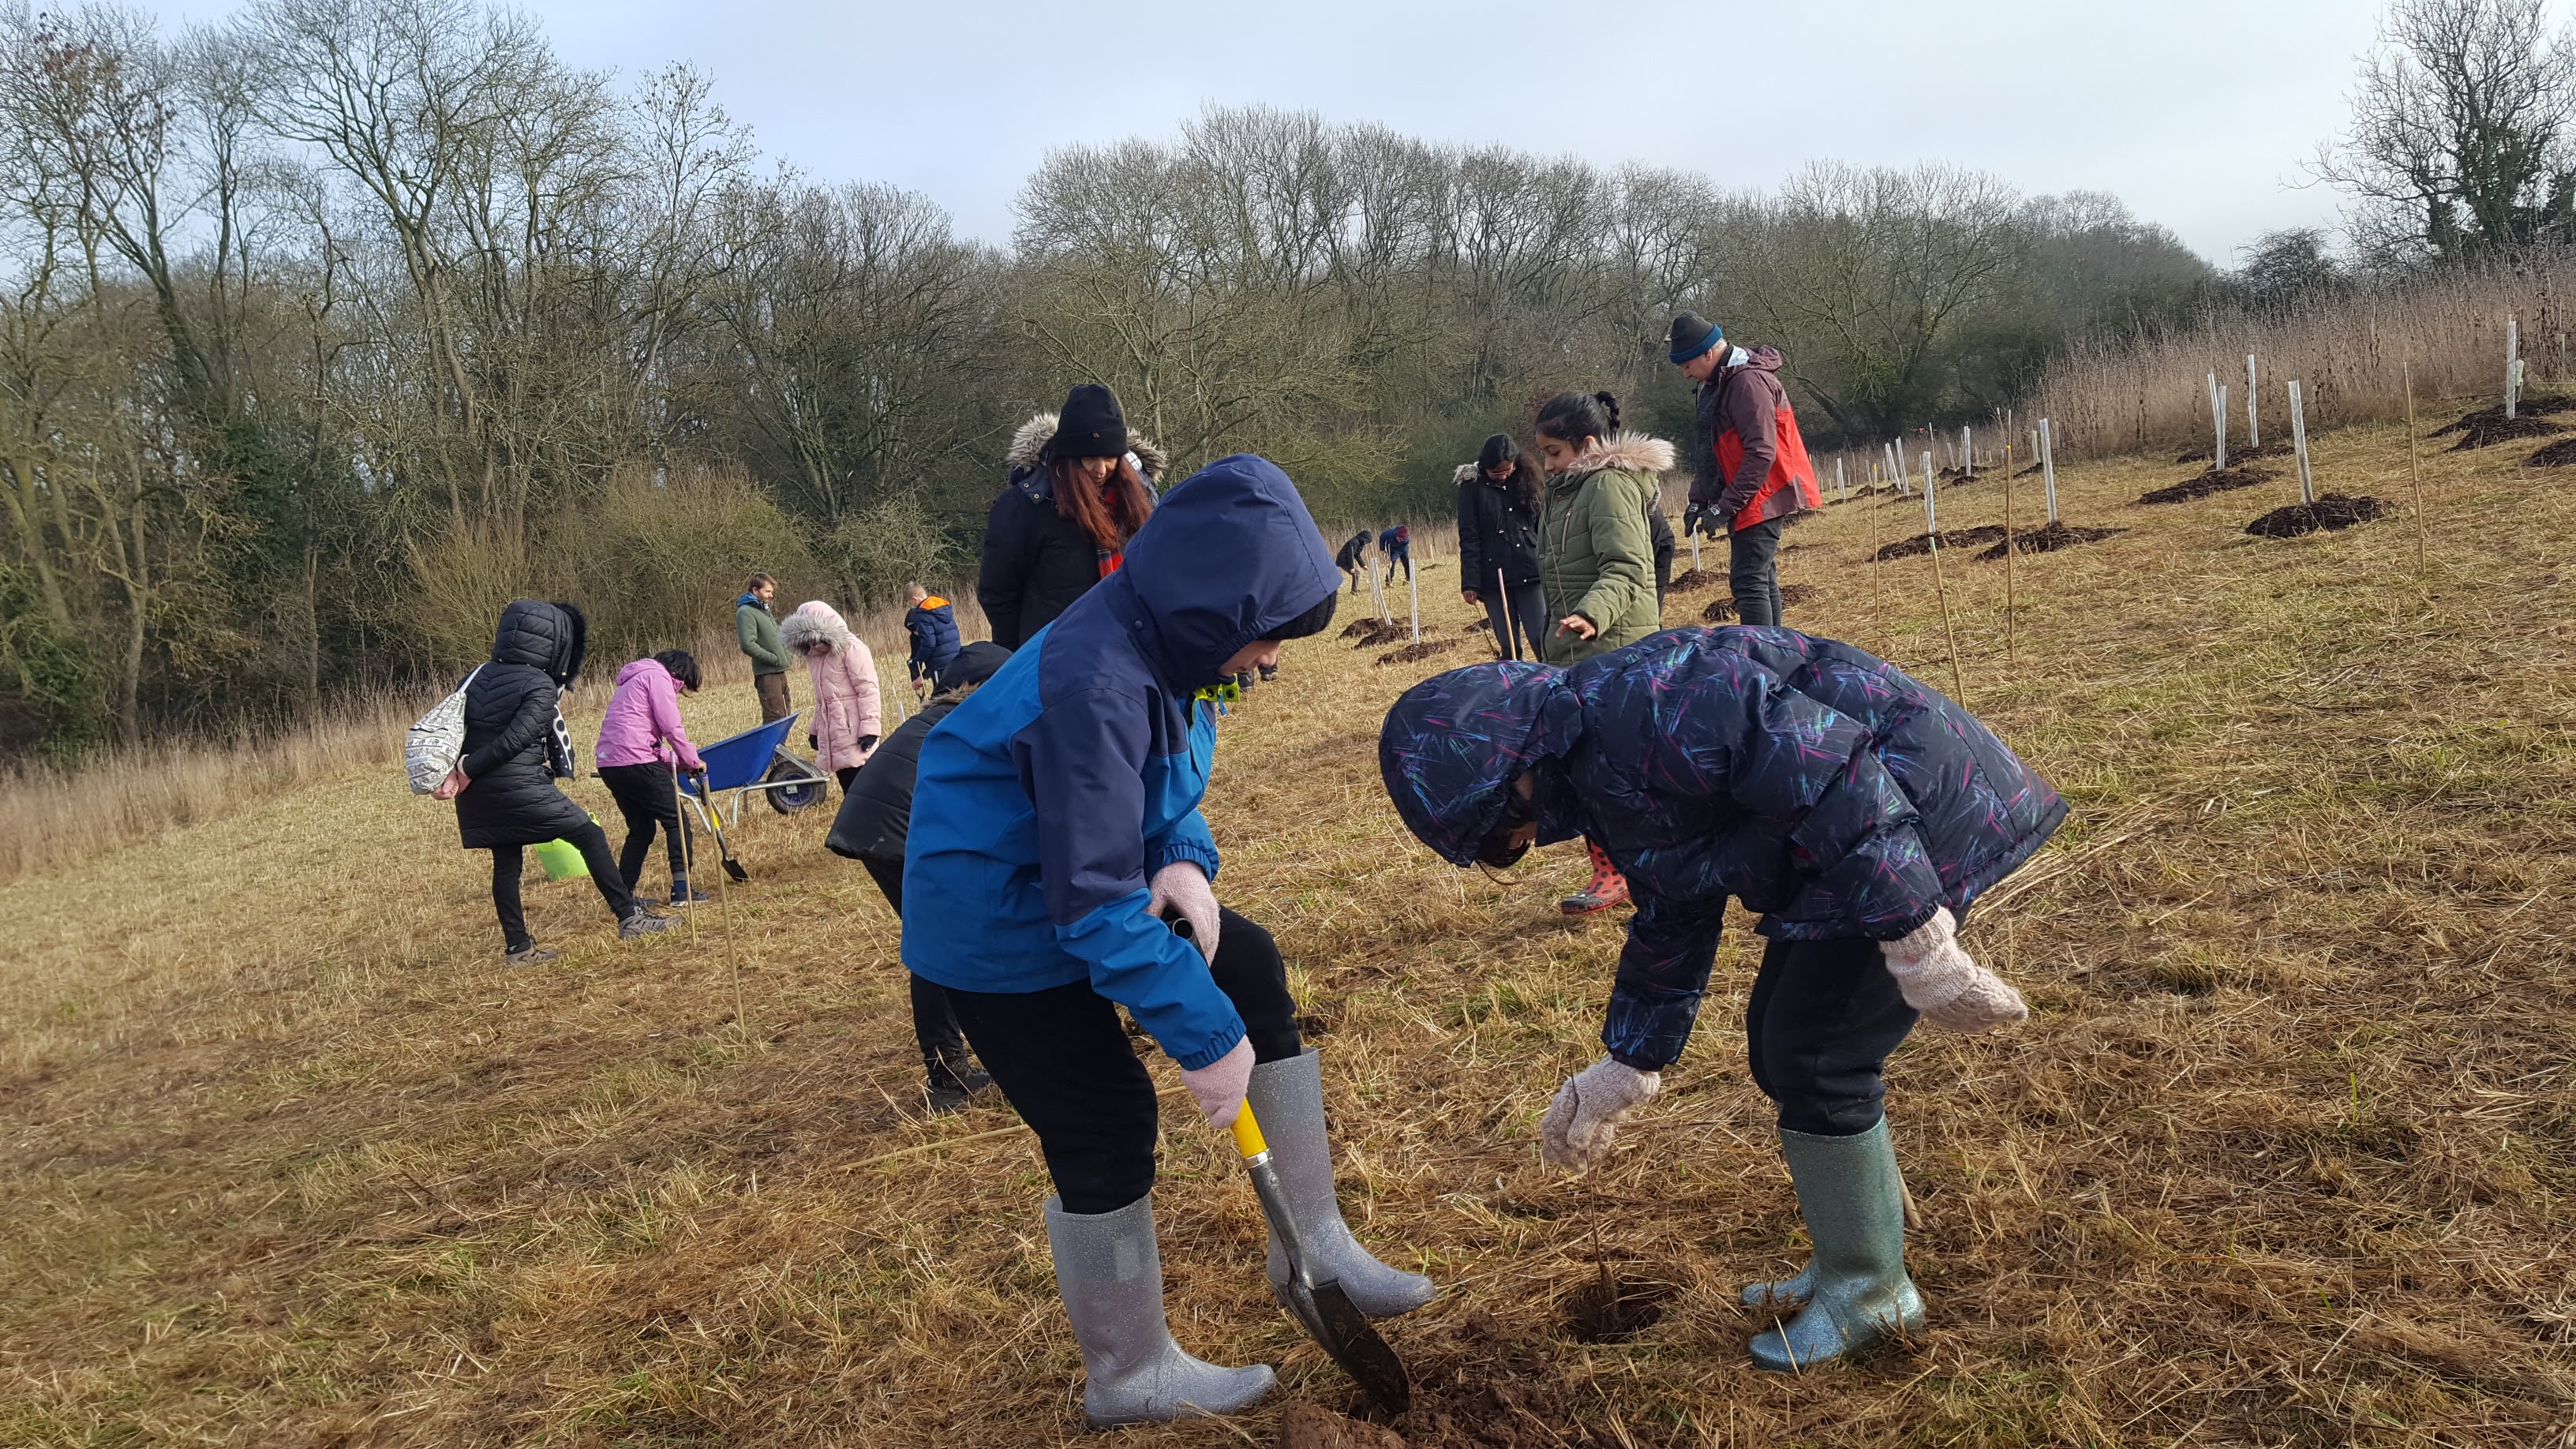 Warwickshire children are given opportunities to get closer to nature